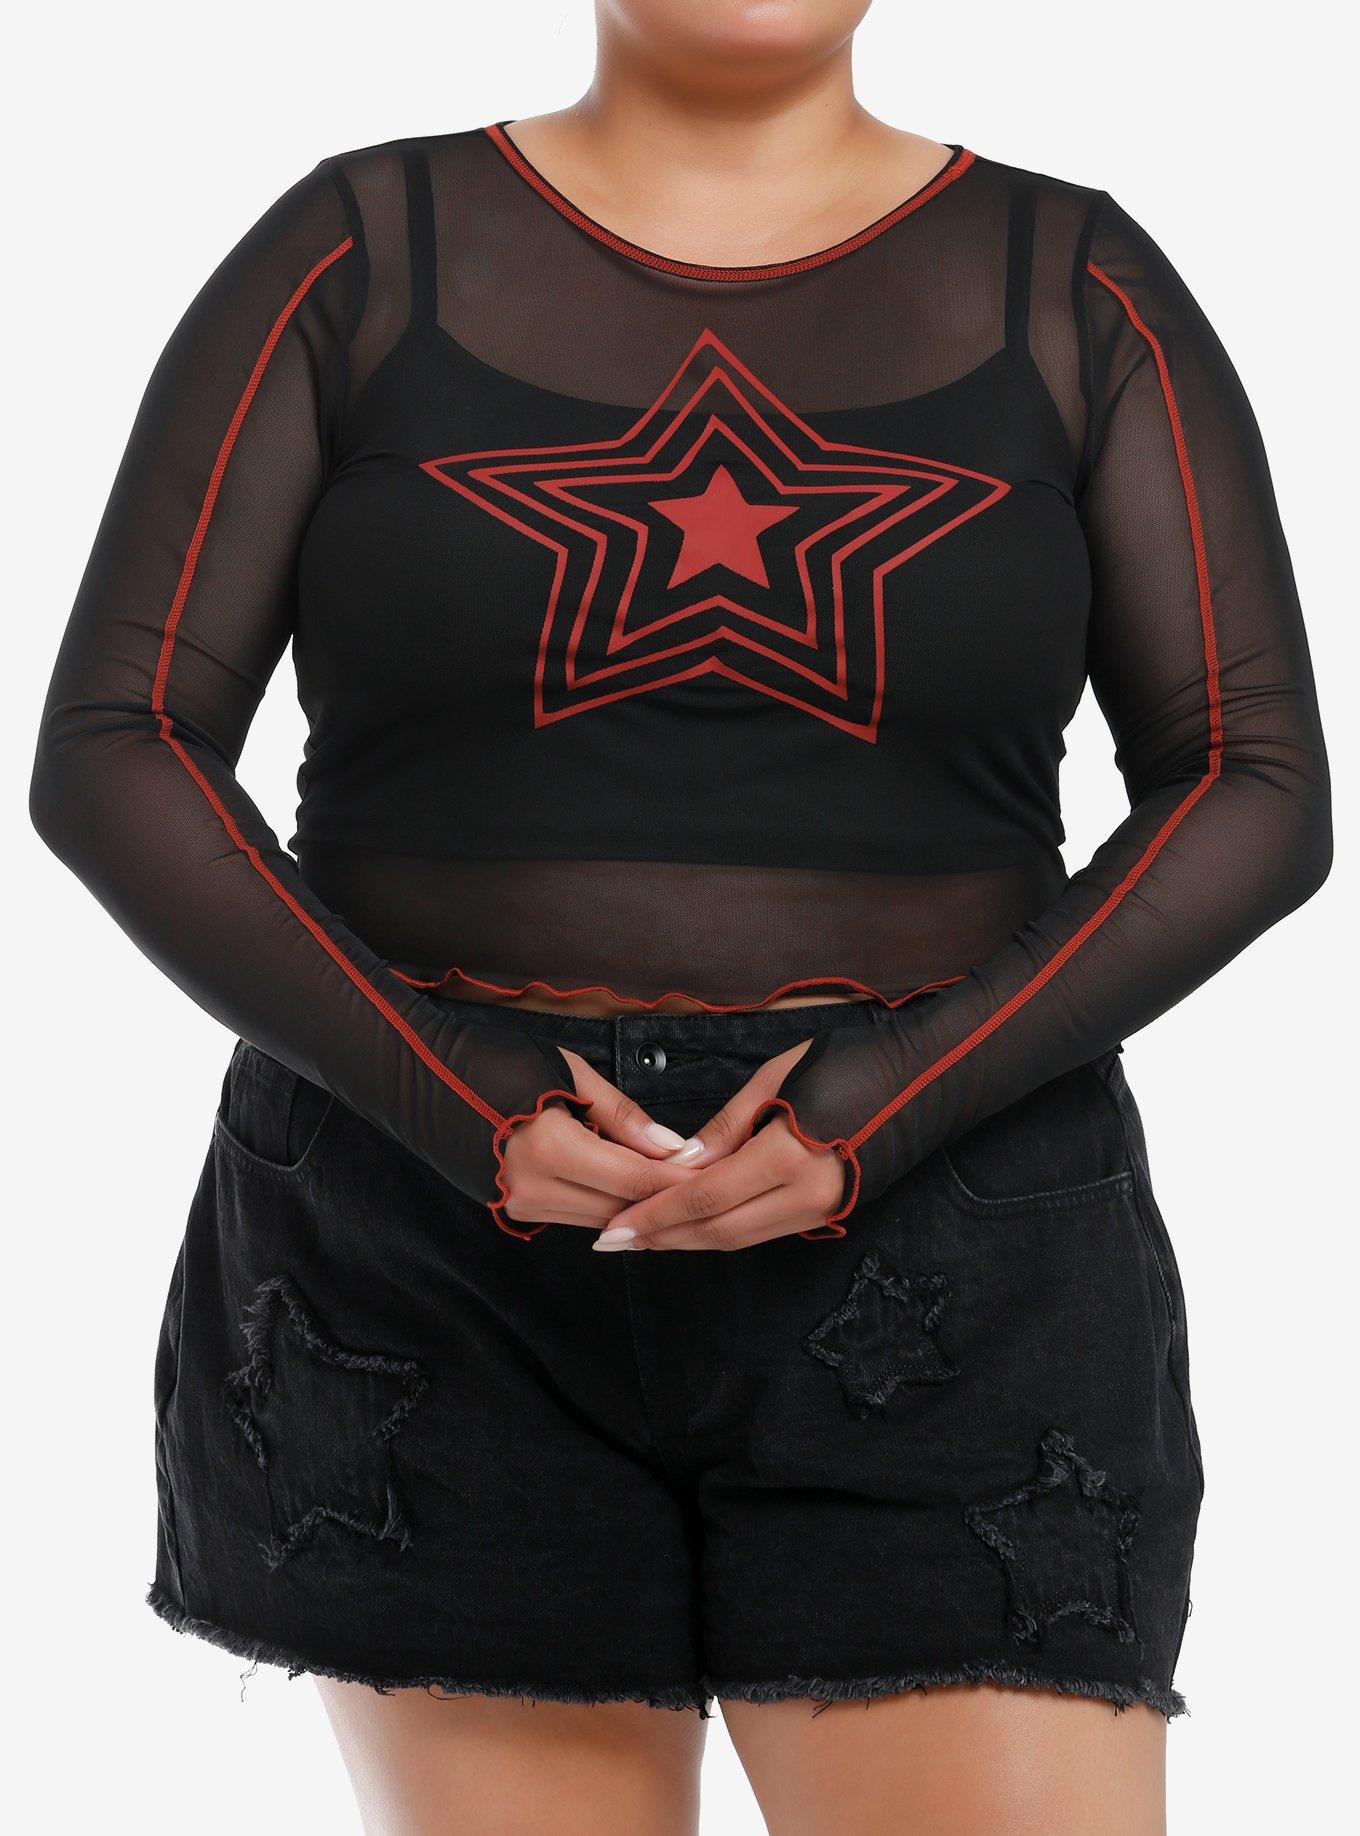 Social Collision Red Star Mesh Girls Crop Long-Sleeve Twofer Plus Size, RED, hi-res